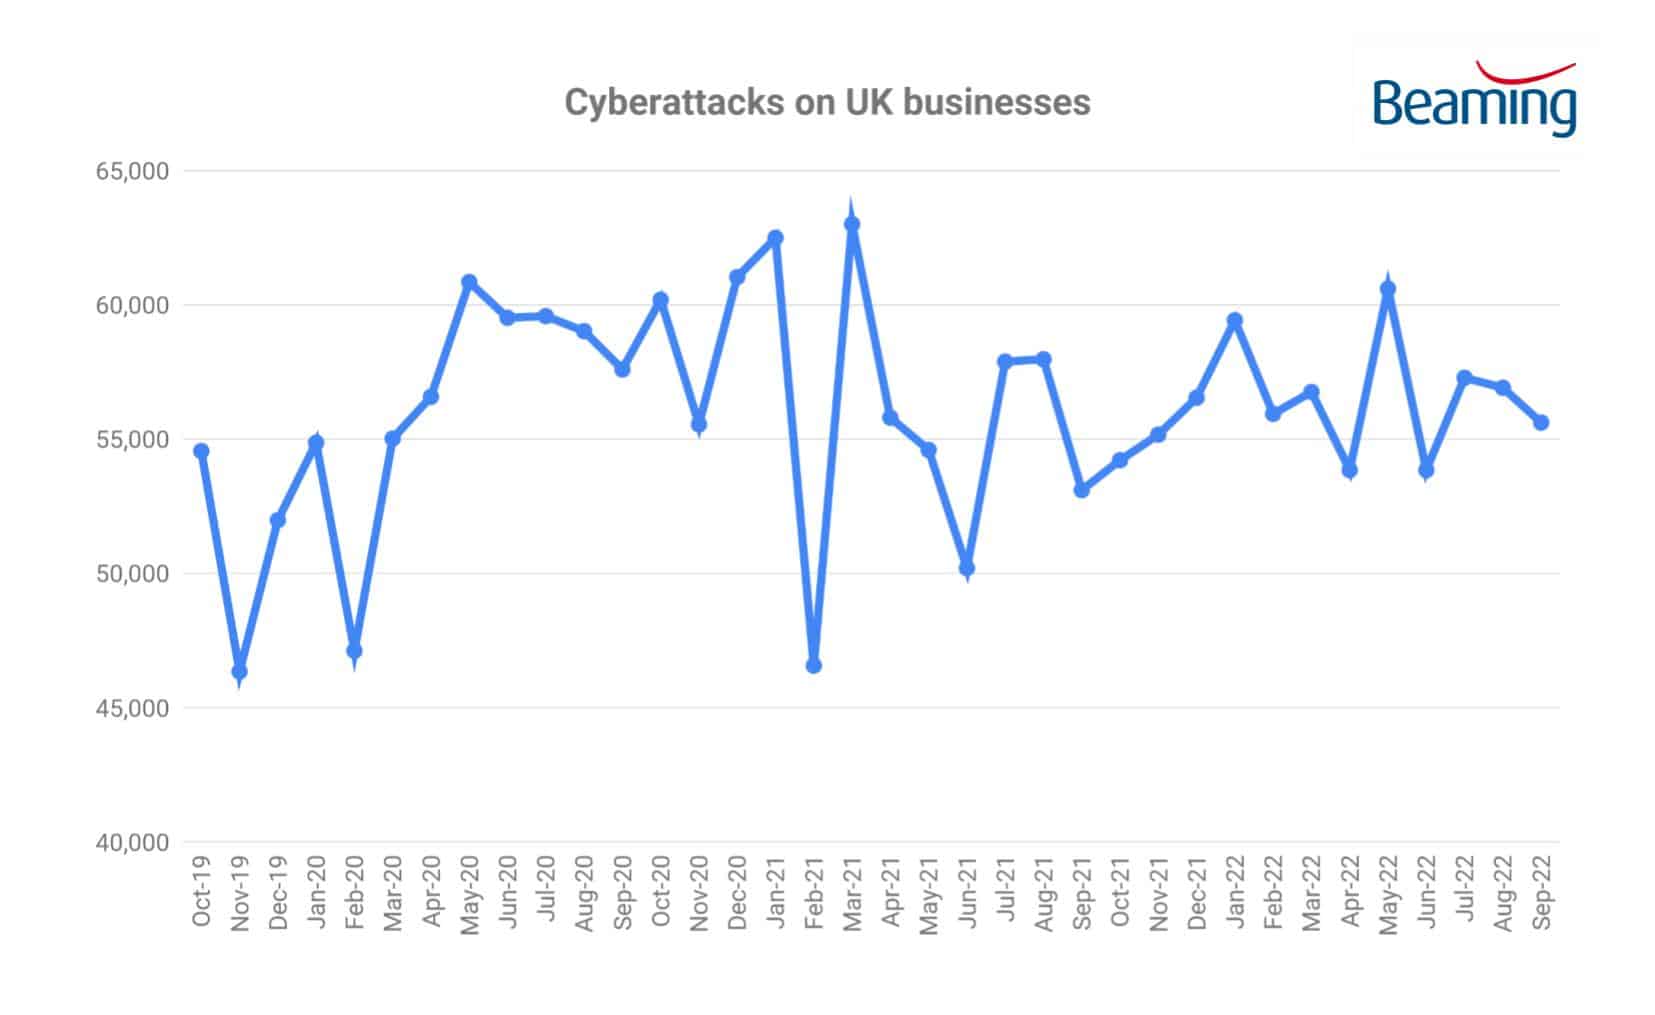 Cyberattacks on UK businesses Oct19 - Sep22